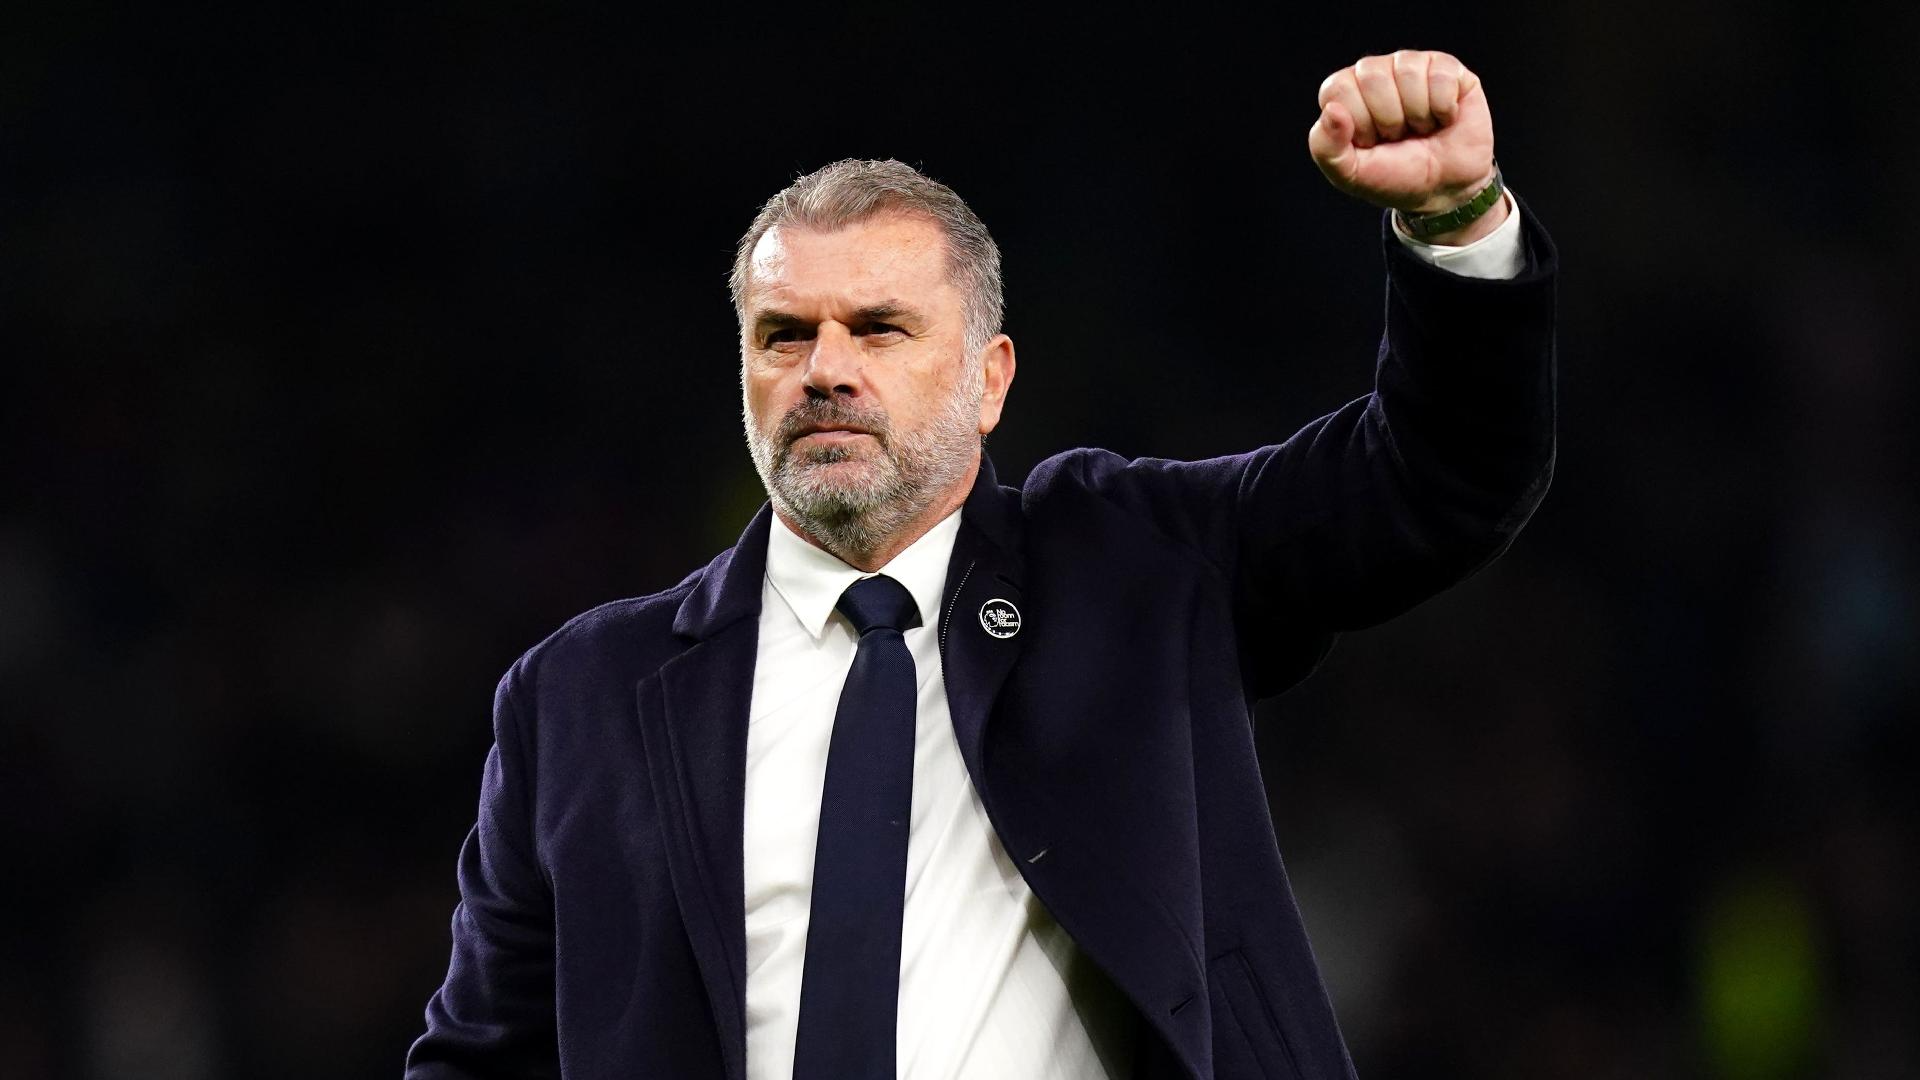 Postecoglou Becomes EPL Coach Of The Month For The Third Time In A Row